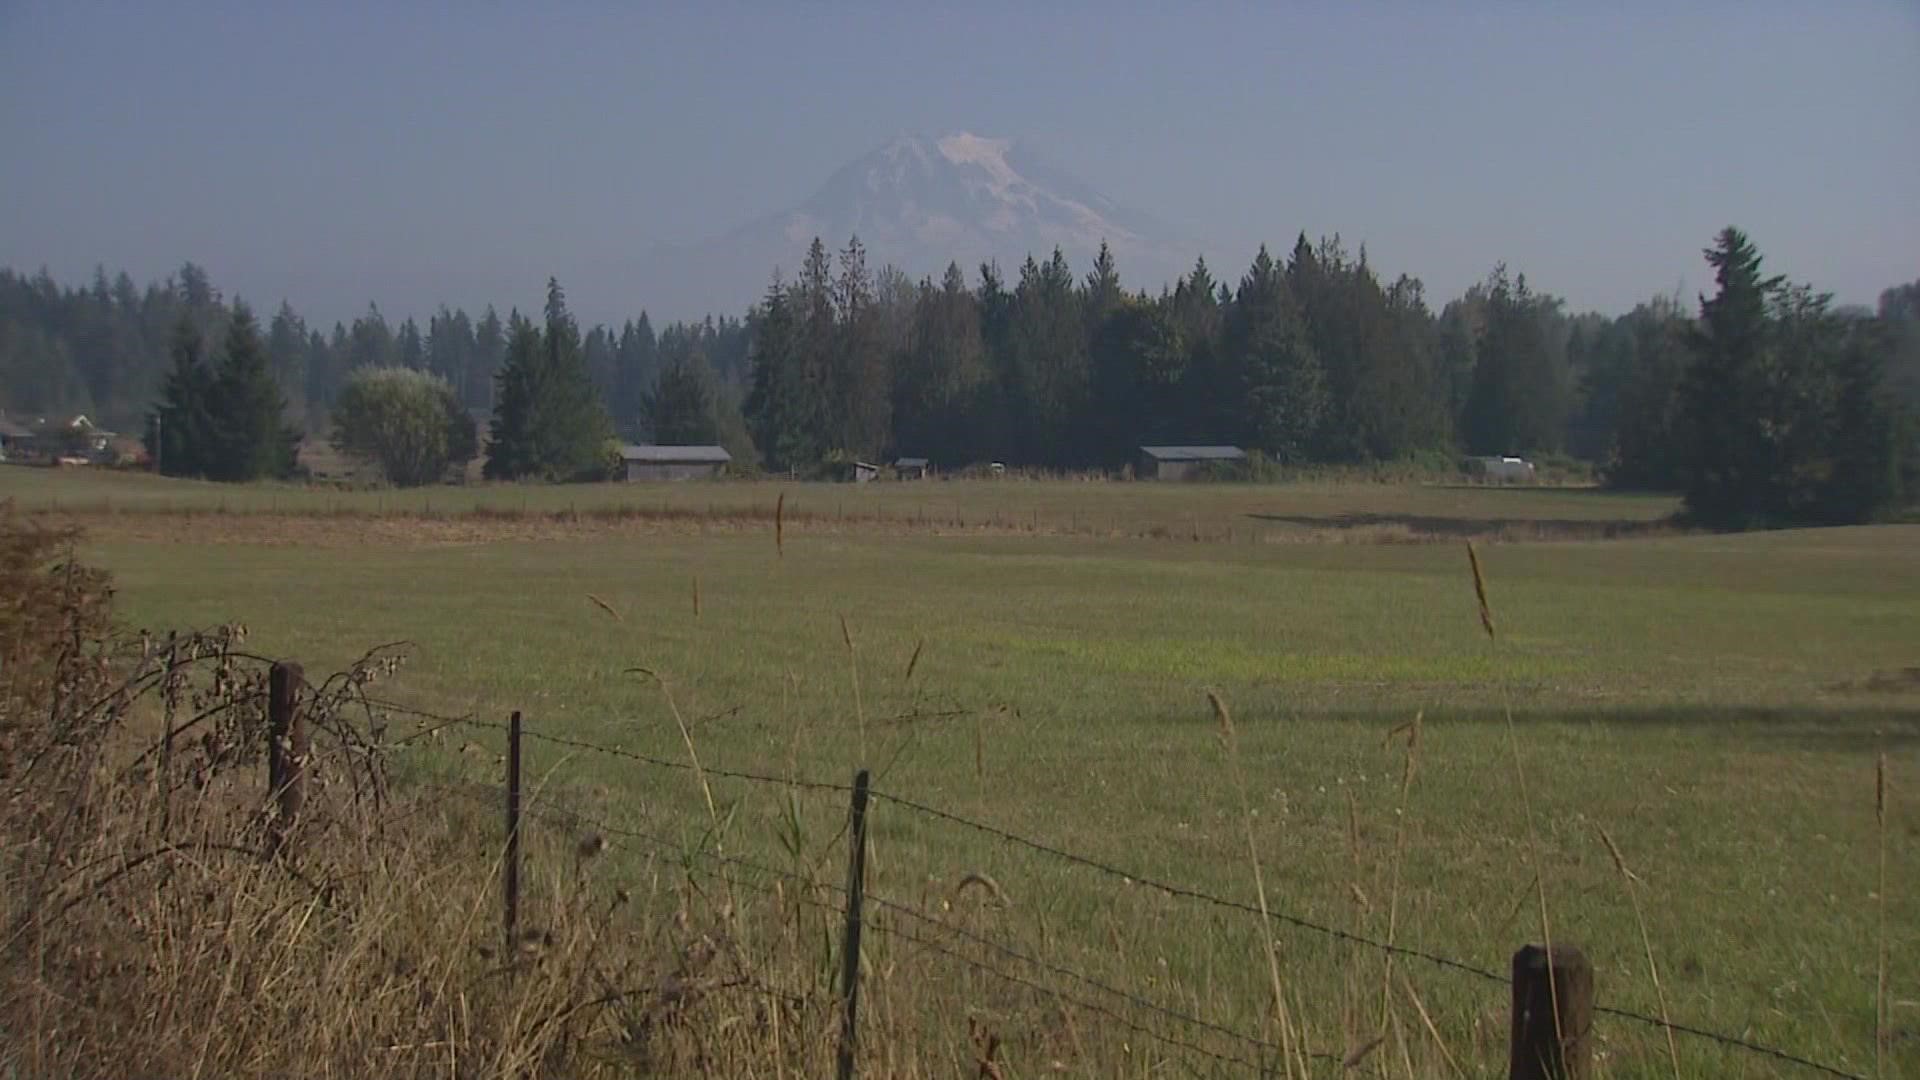 Despite opposition, central Thurston County is now one of three potential new sites for a two-runway airport.